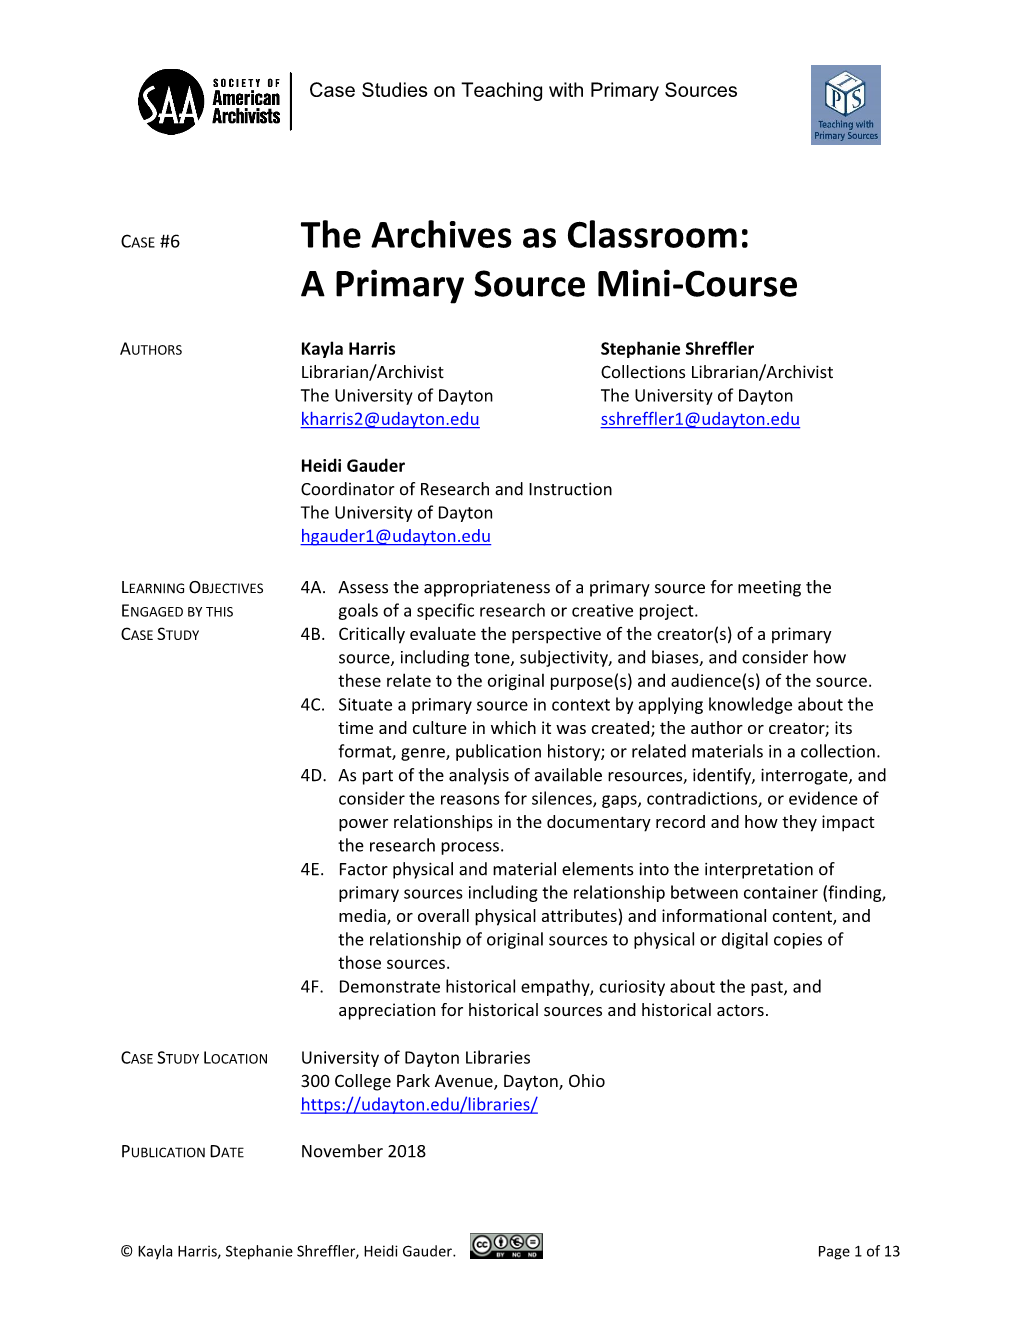 The Archives As Classroom: a Primary Source Mini-Course